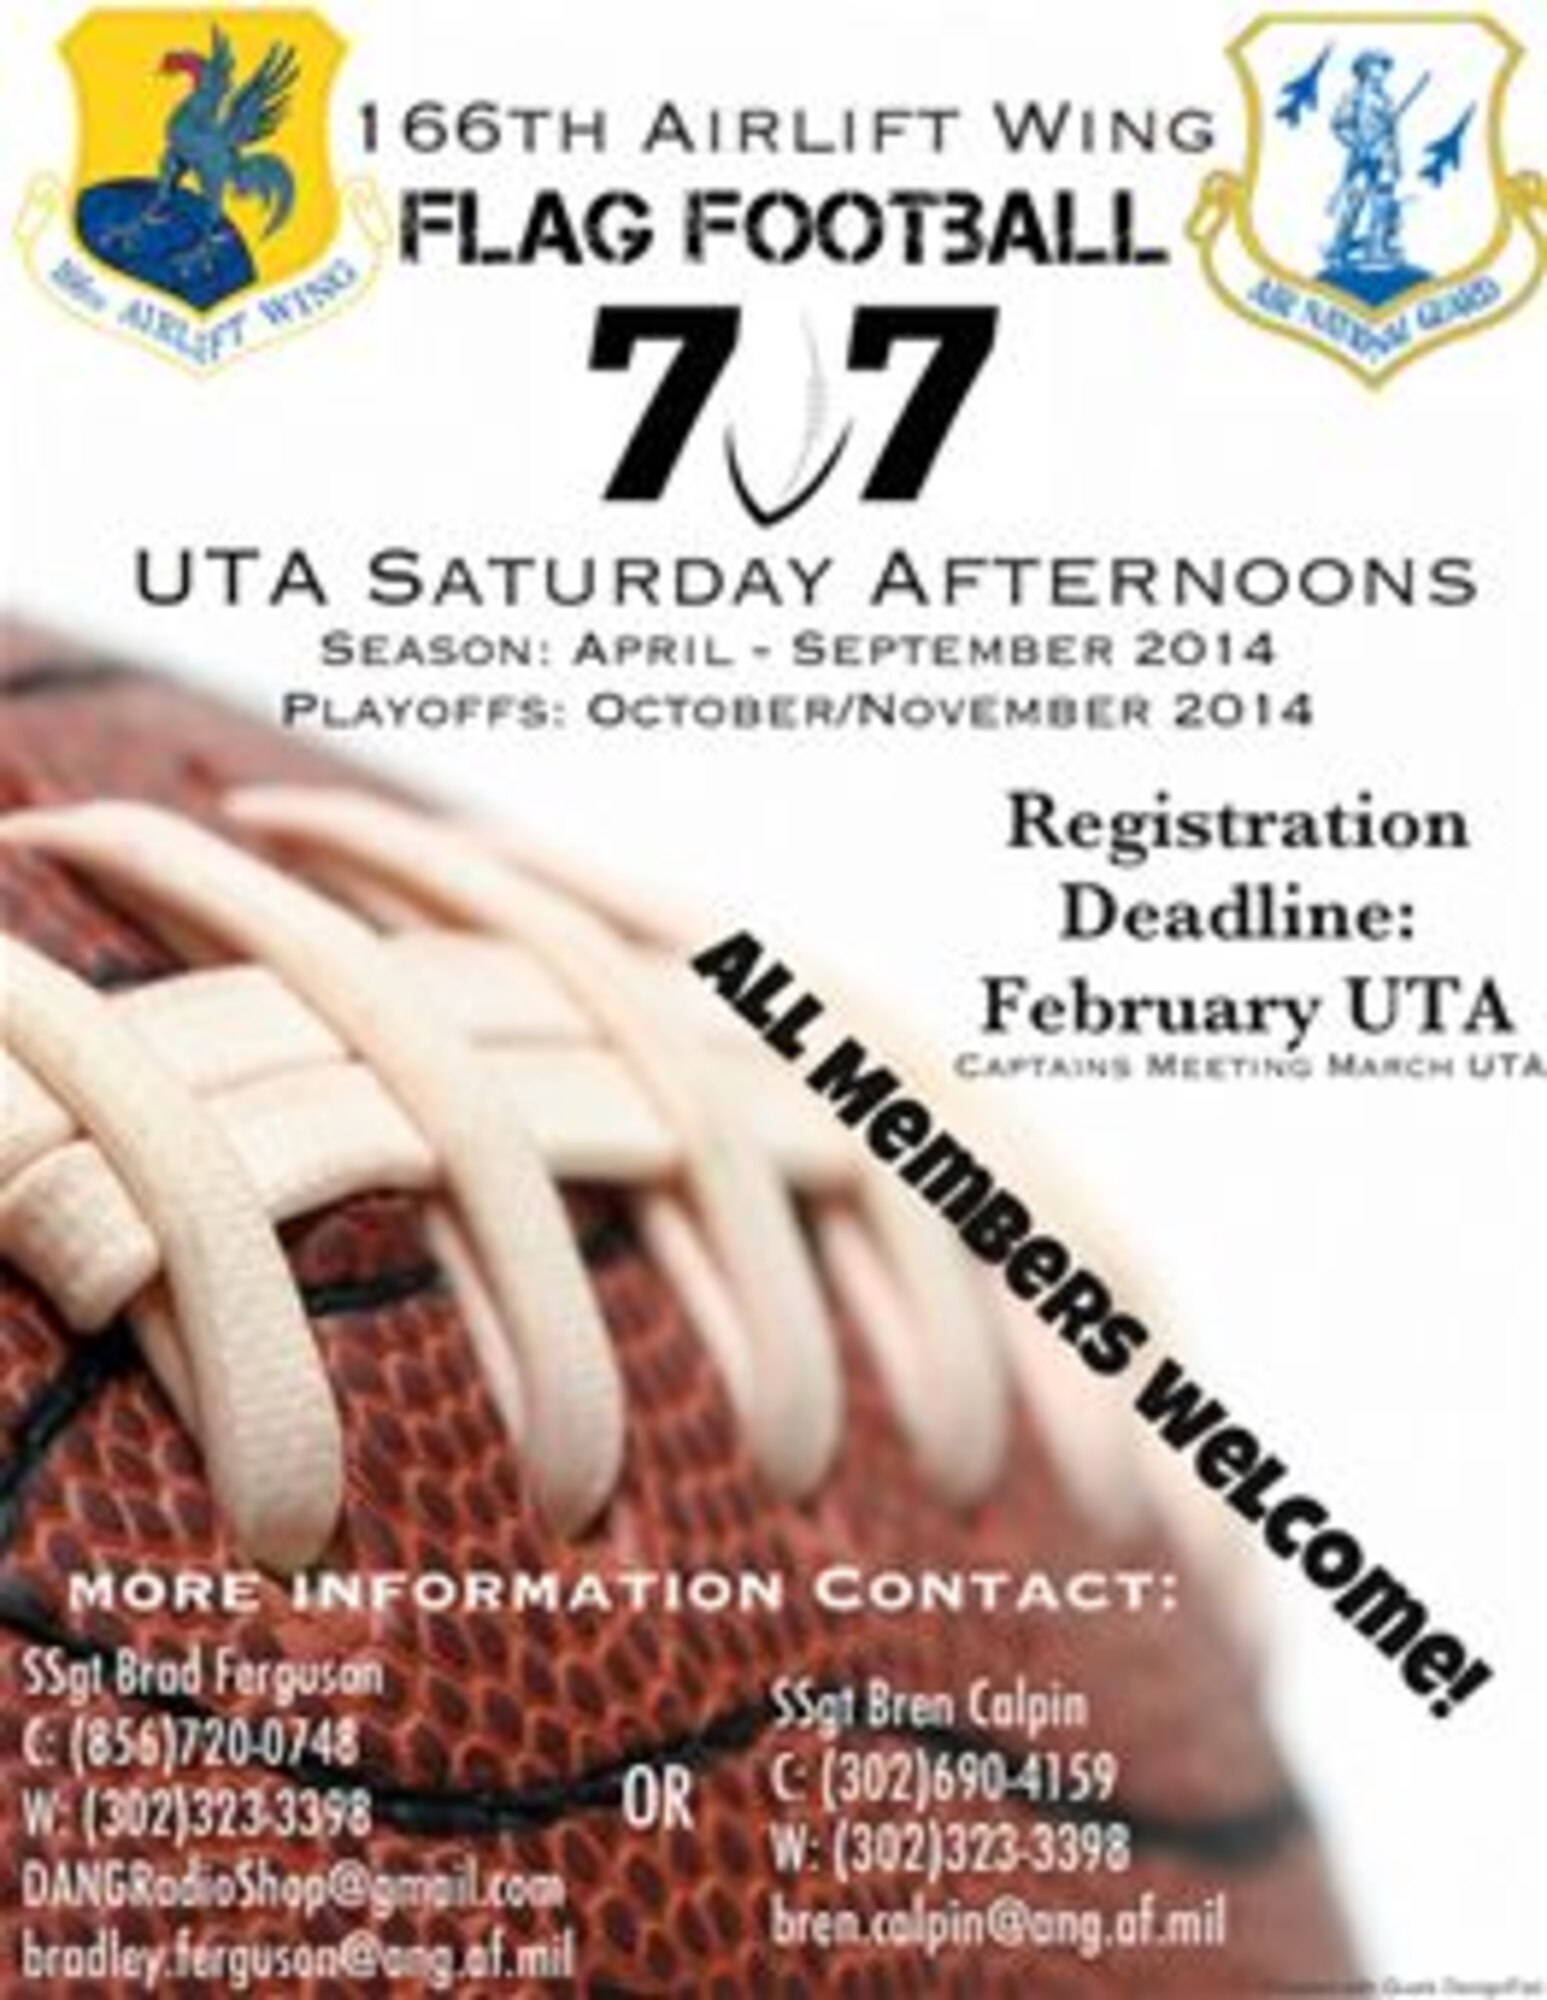 7x7 flag football league forming for all members of the 166th Airlift Wing